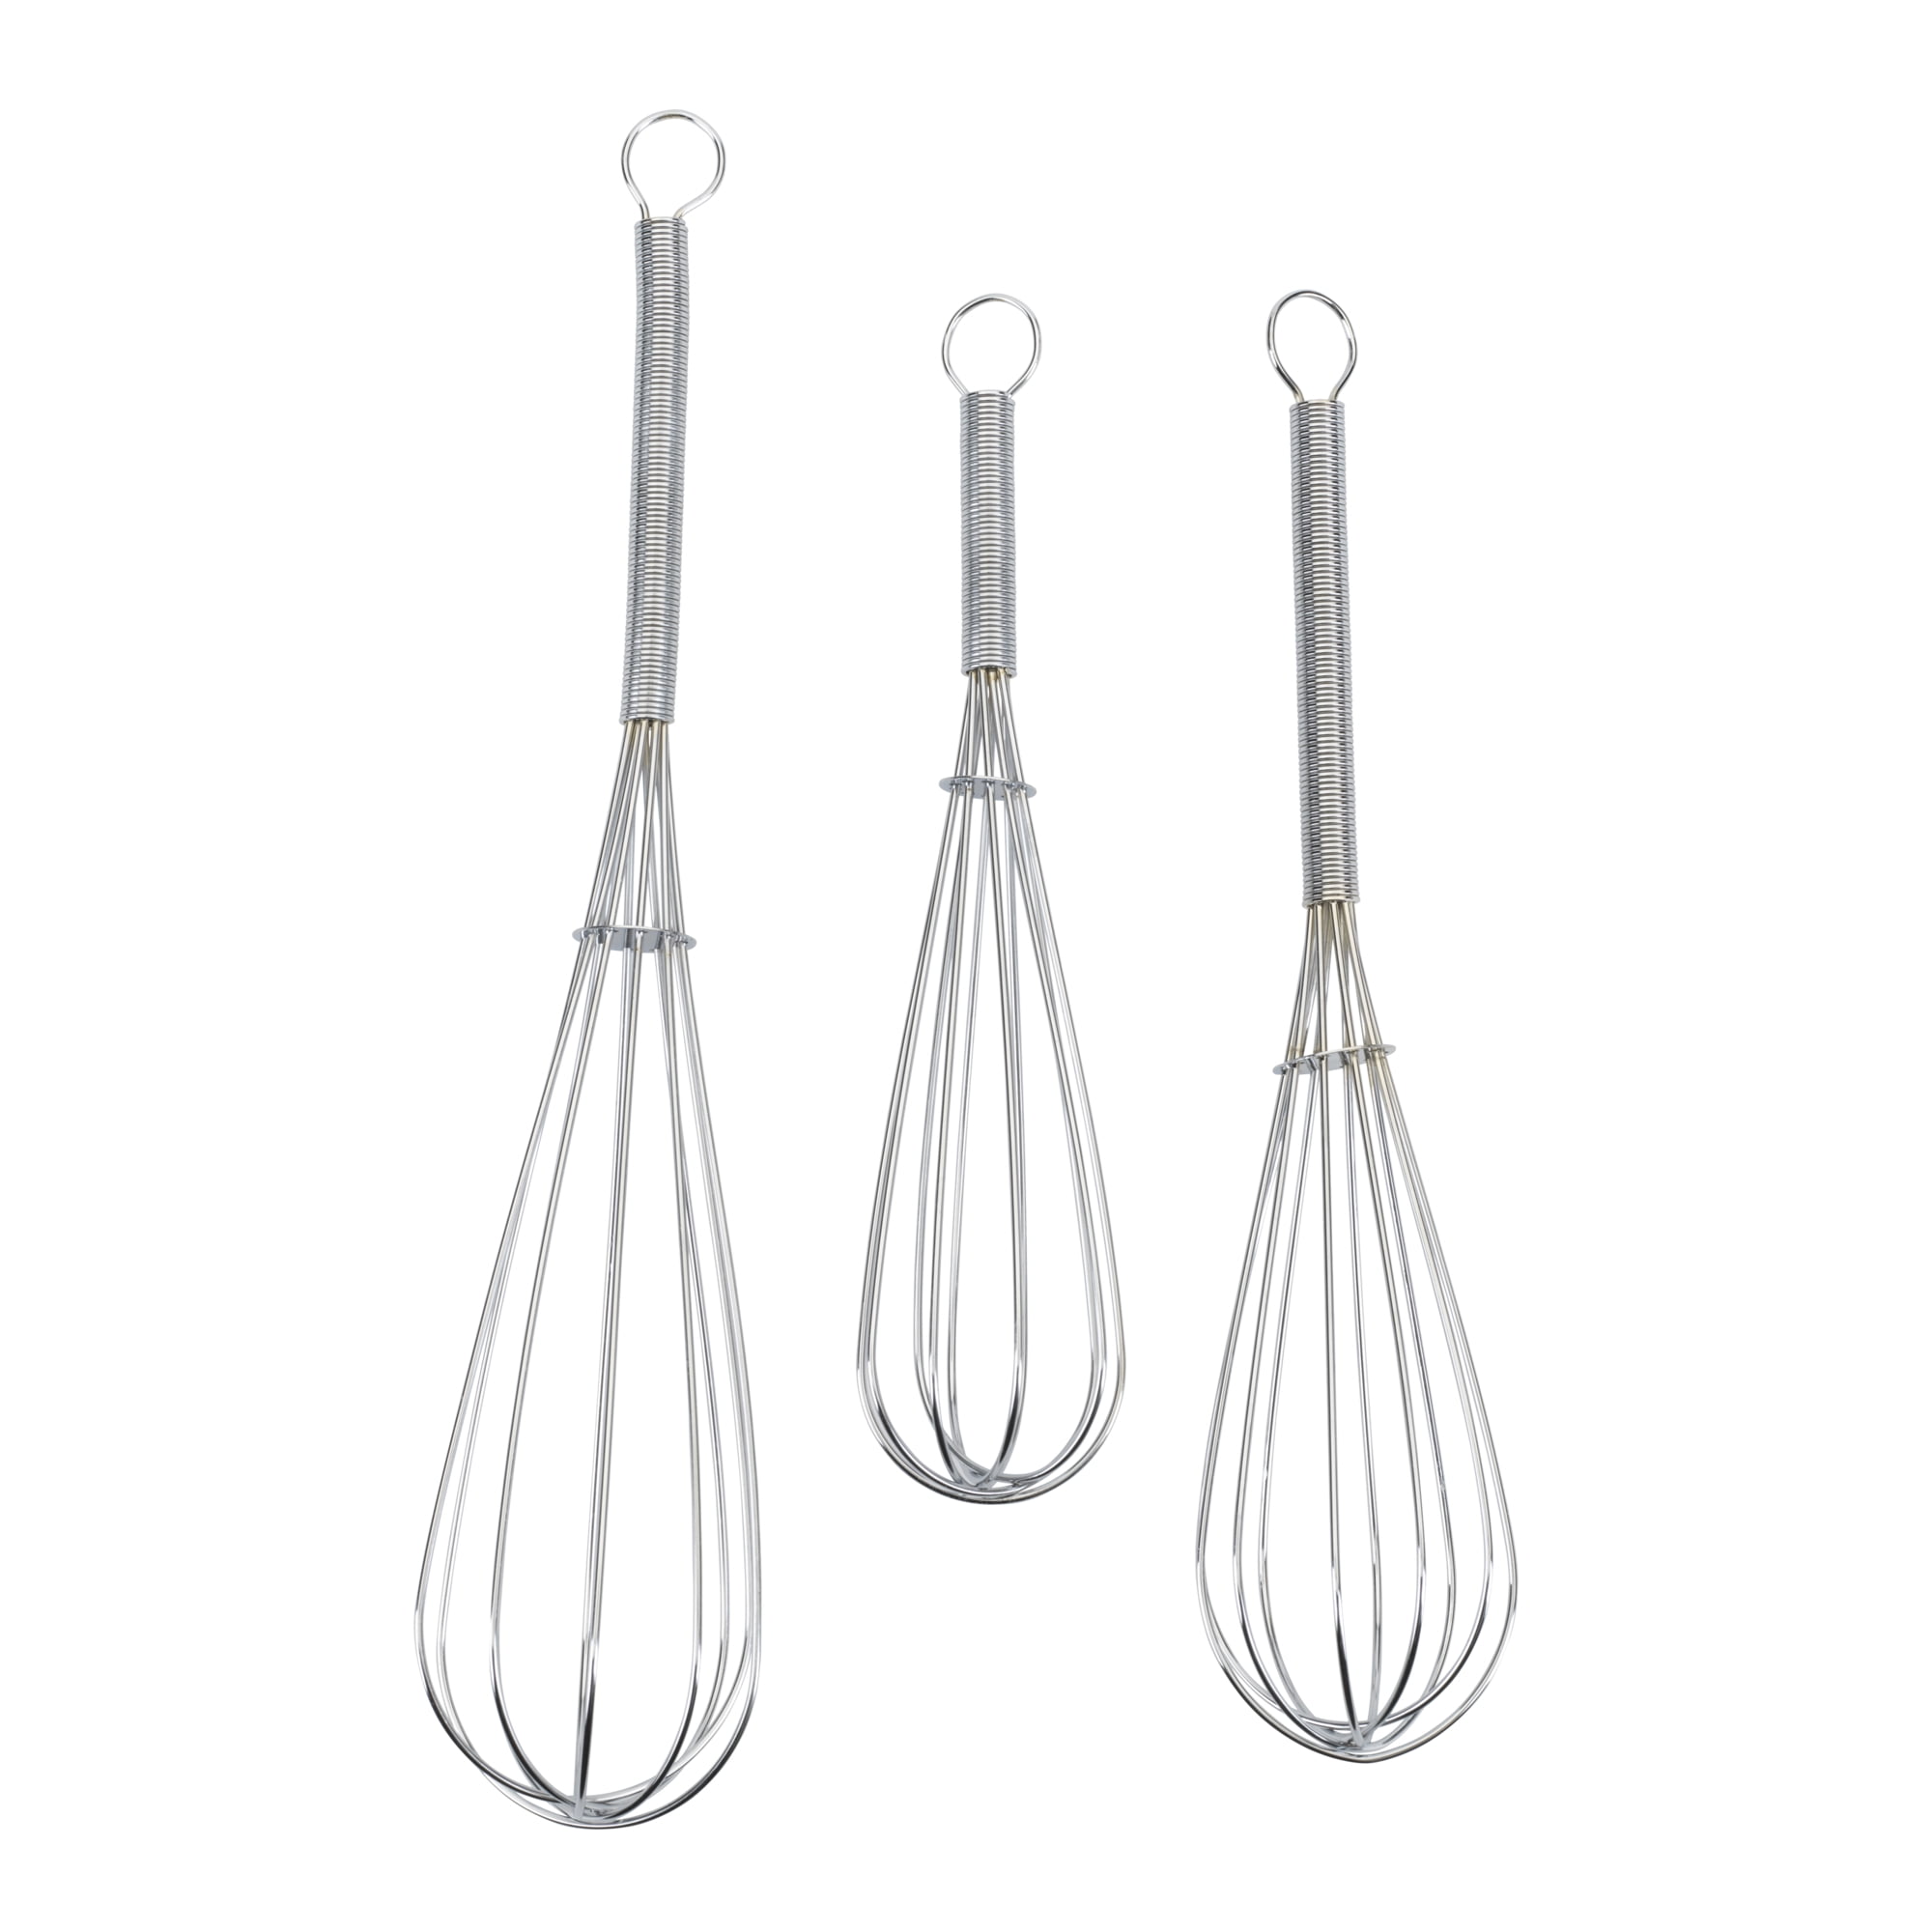 GoodCook PROfreshionals 3-Piece Triple Chrome Plated Balloon Whisk Set, Assorted Sizes